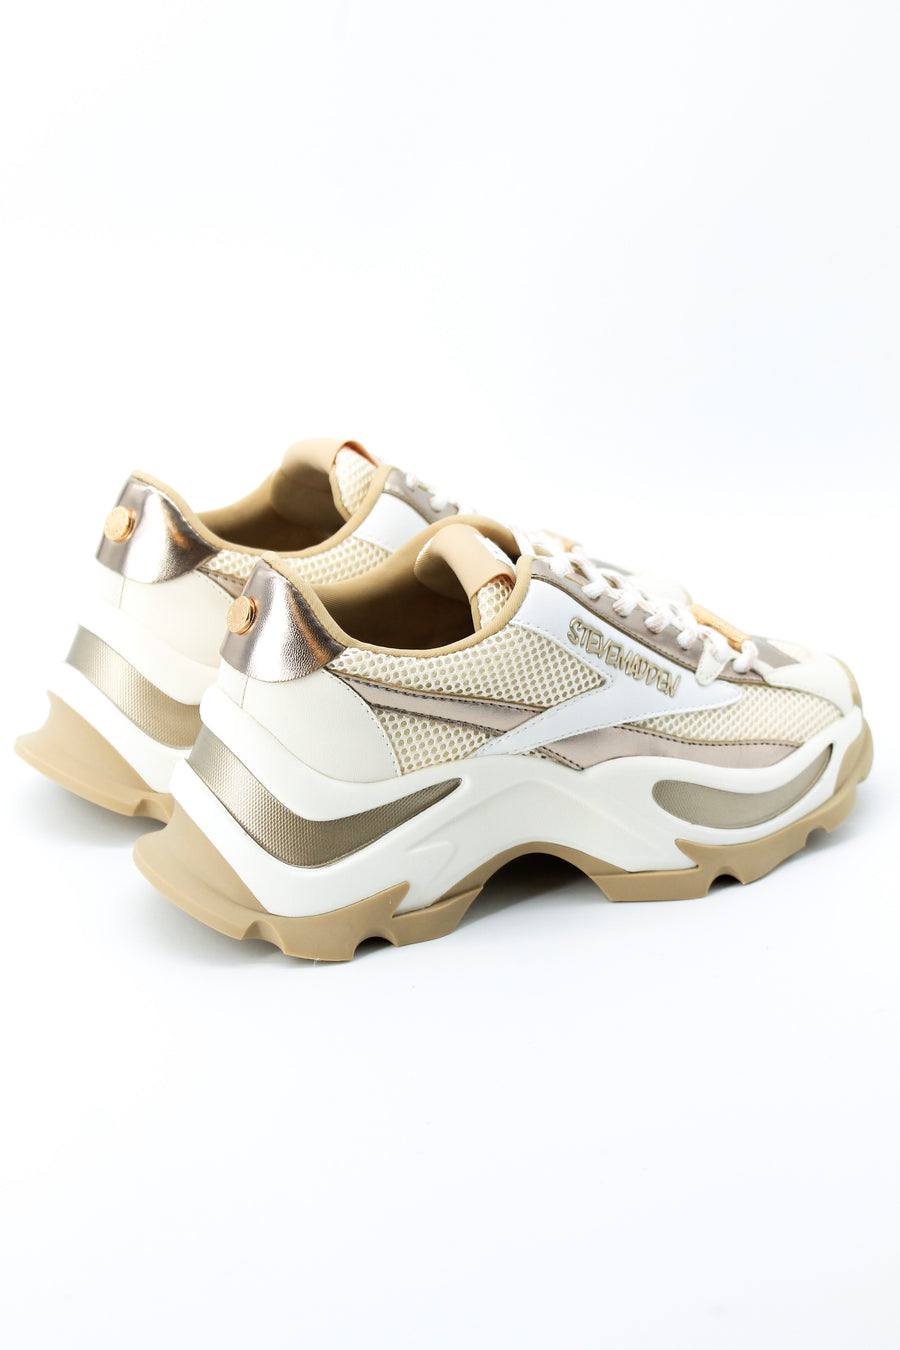 Steve Madden Zoomz Cream and Rose Gold